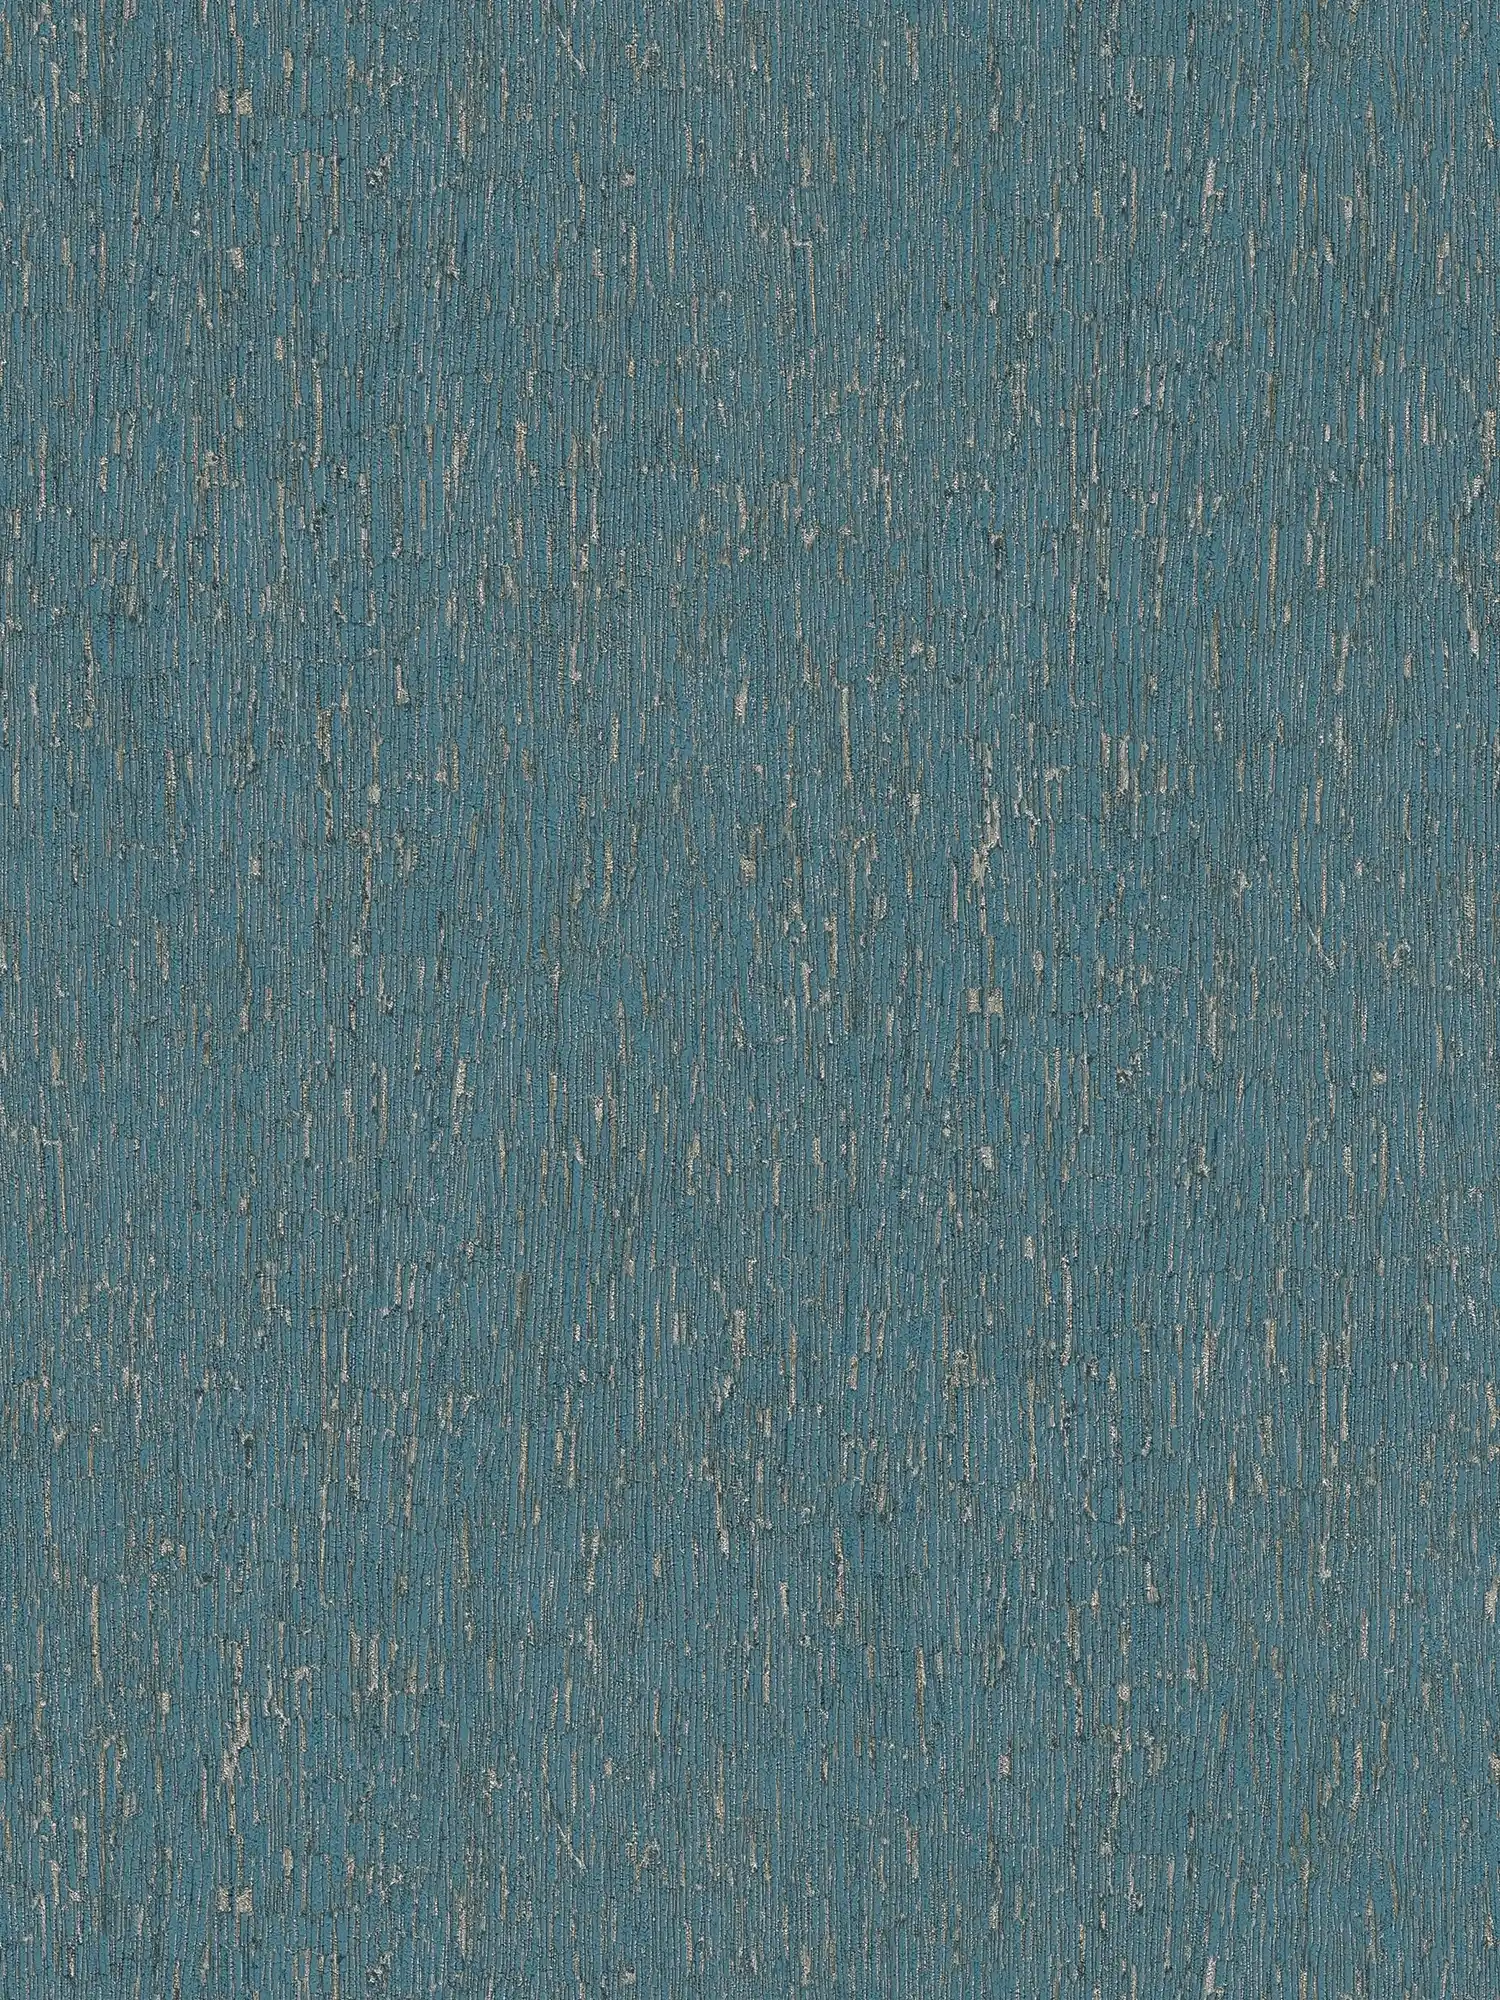 Non-woven wallpaper in plaster look with gold accents - blue, petrol, silver
